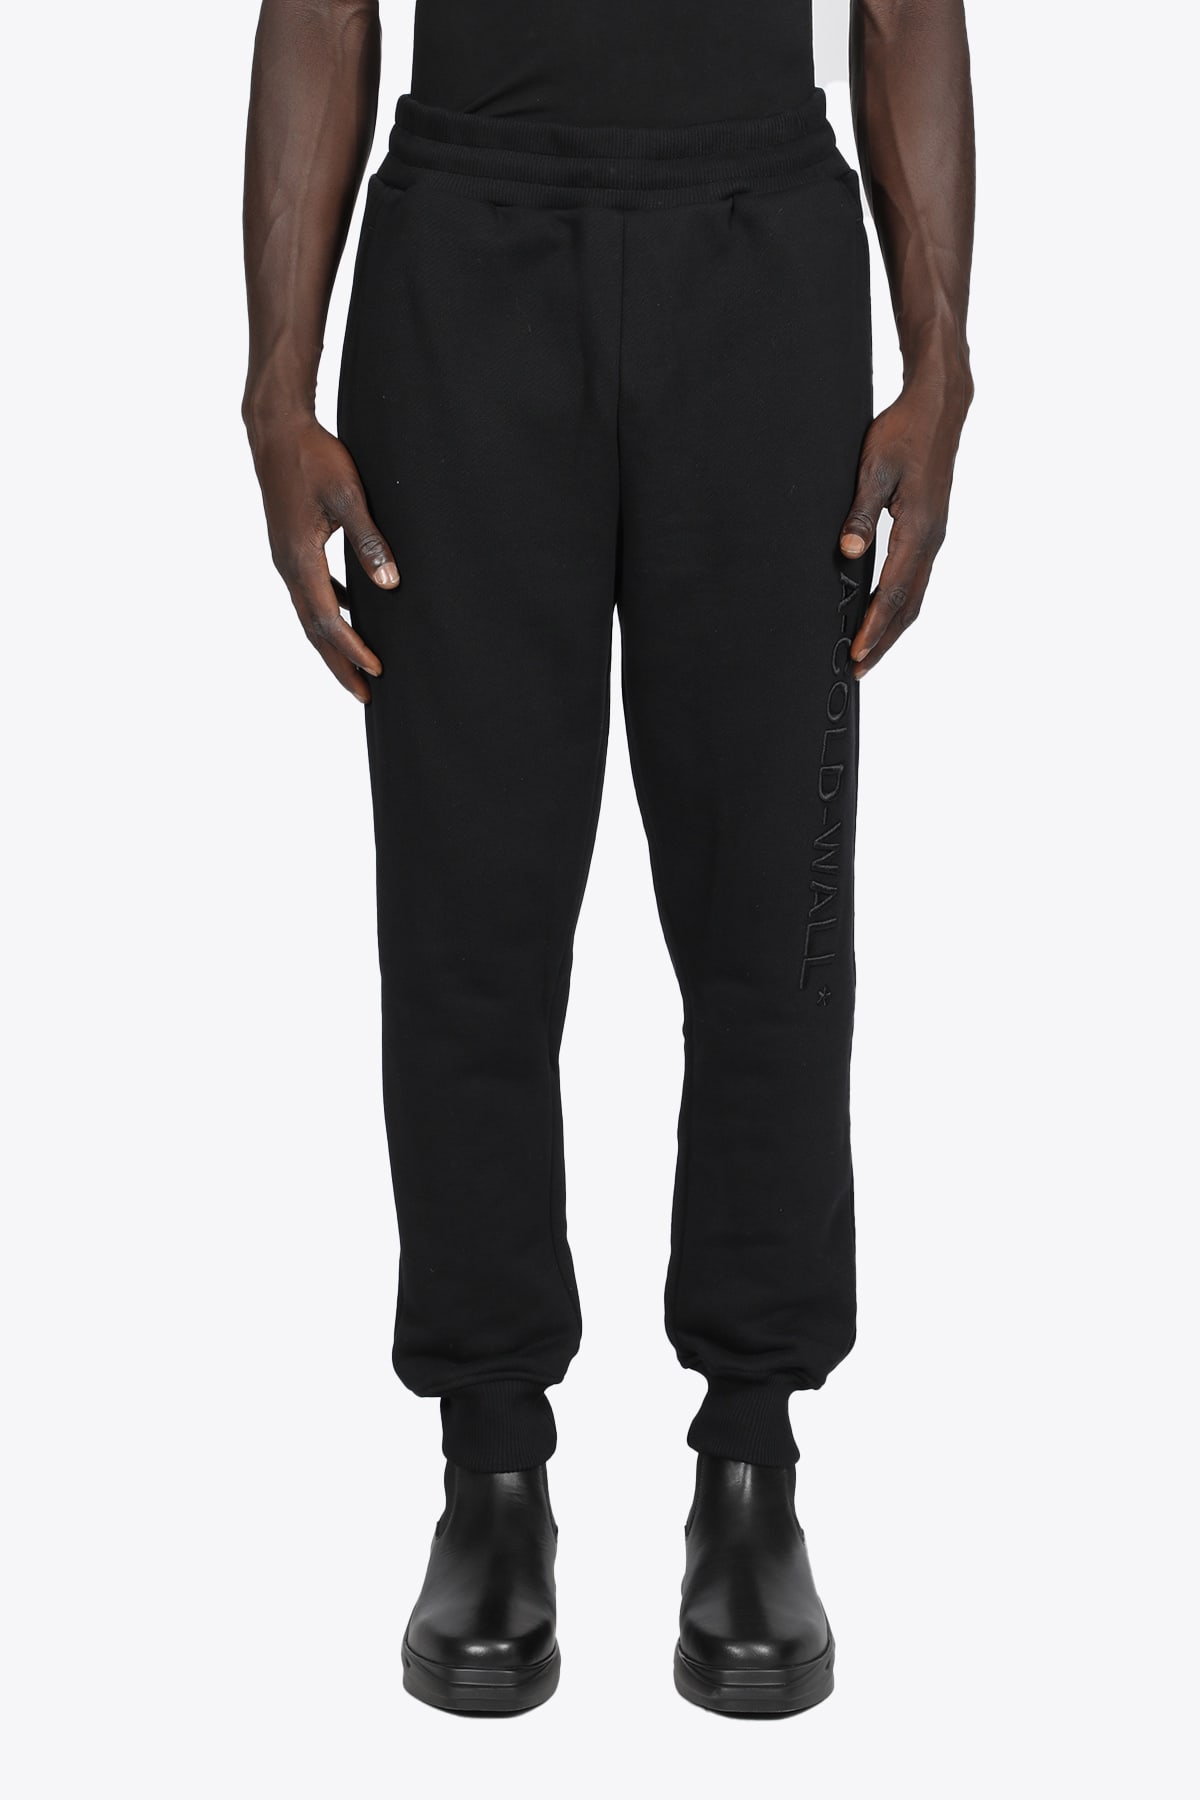 A-COLD-WALL Logo Sweatpant Black cotton sweatpant with embroidered logo